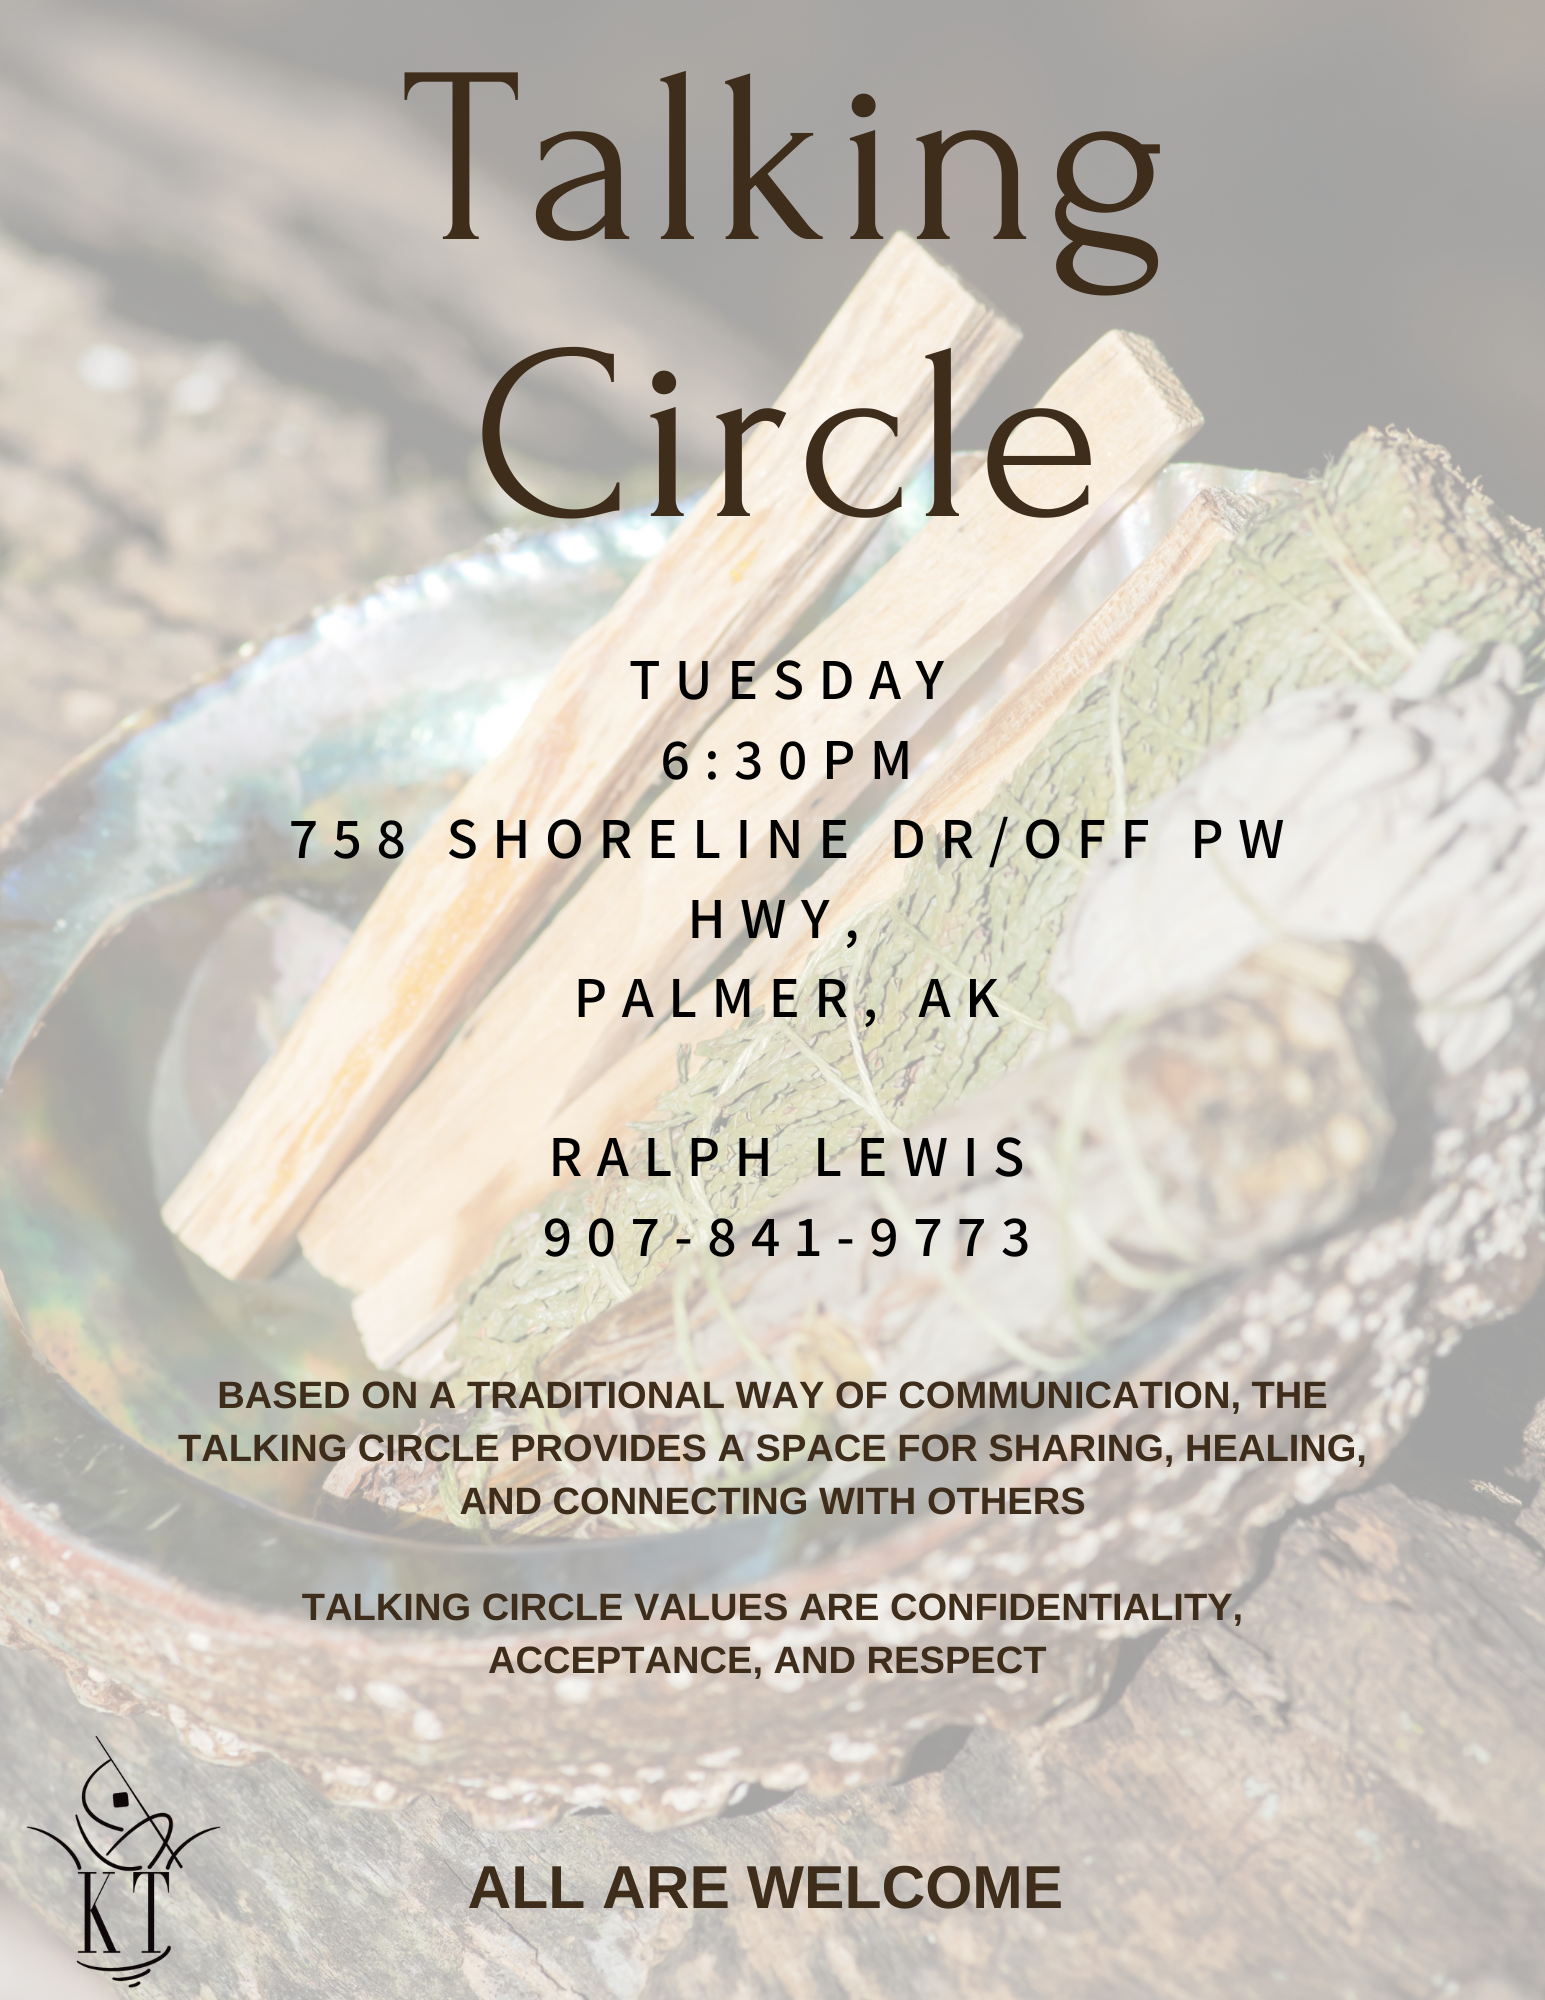 Flyer with info on weekly talking circle hosted by Knik Tribe.